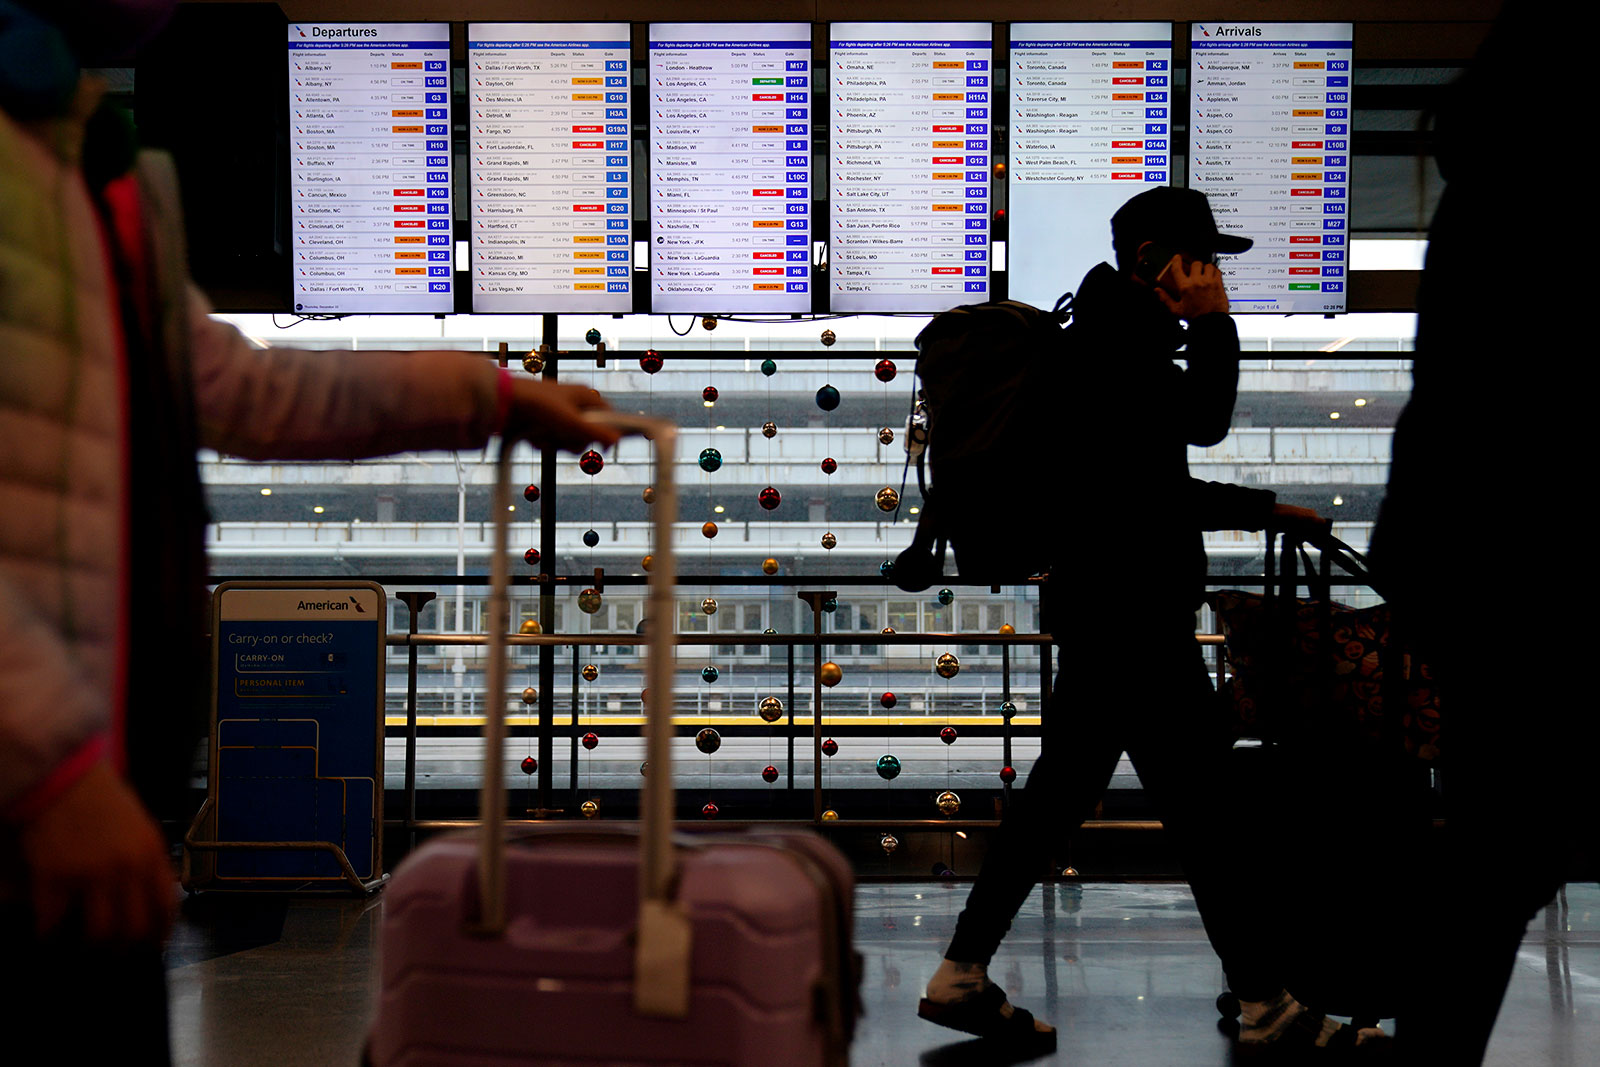 Passengers walk in front of flight information screens at Chicago's O'Hare International Airport on Dec. 22.